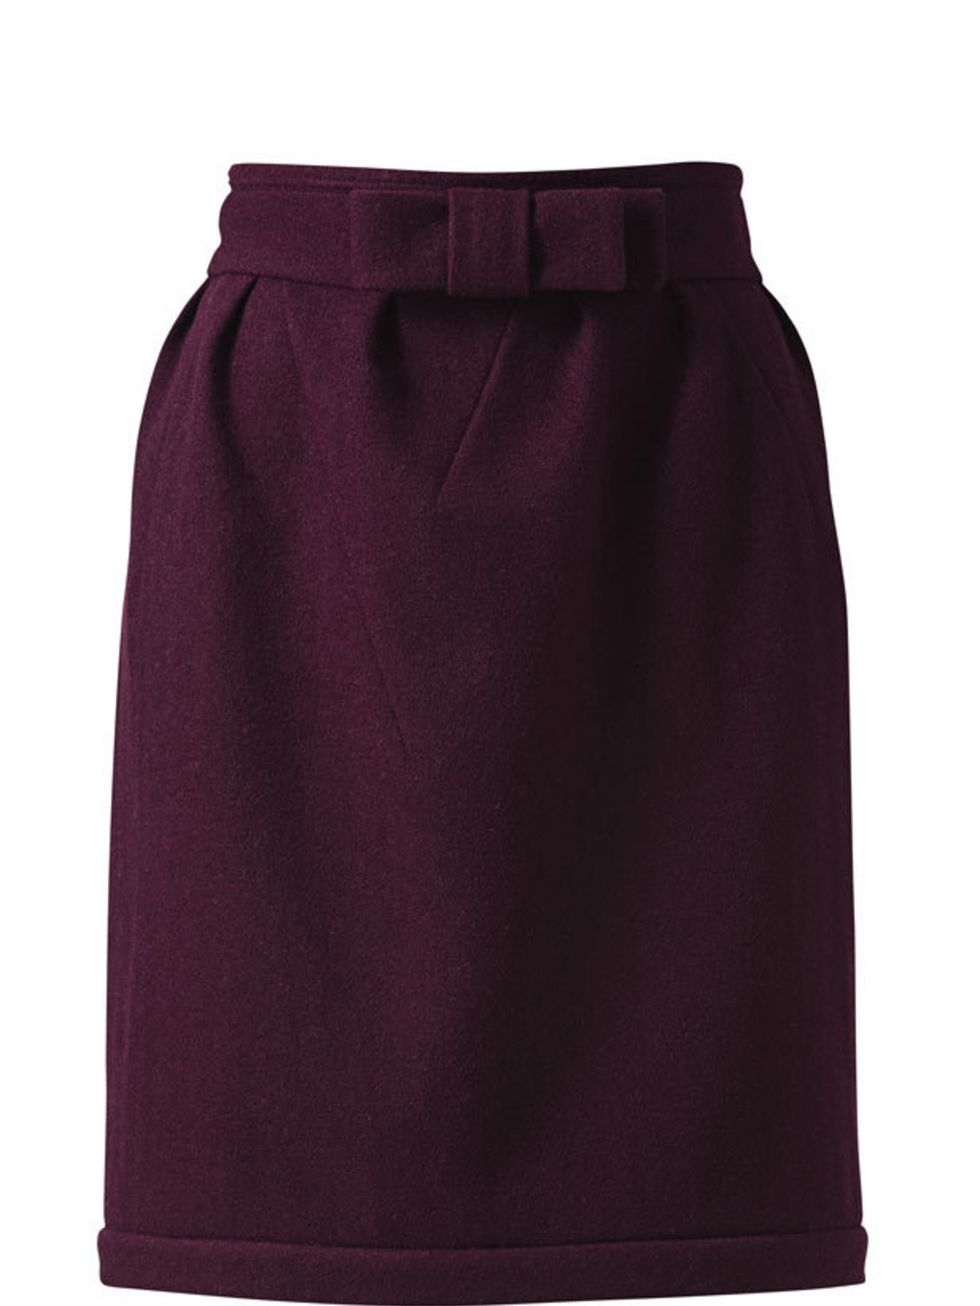 <p>It may seem a little premature to be buying wool skirts, but trust us, this is the last ever +J for Uniqlo collection and is sure to sell out fast... +J pencil skirt, £39.90, at <a href="http://shop.uniqlo.com/uk/store/clothing/plusj/women/">Uniqlo</a>